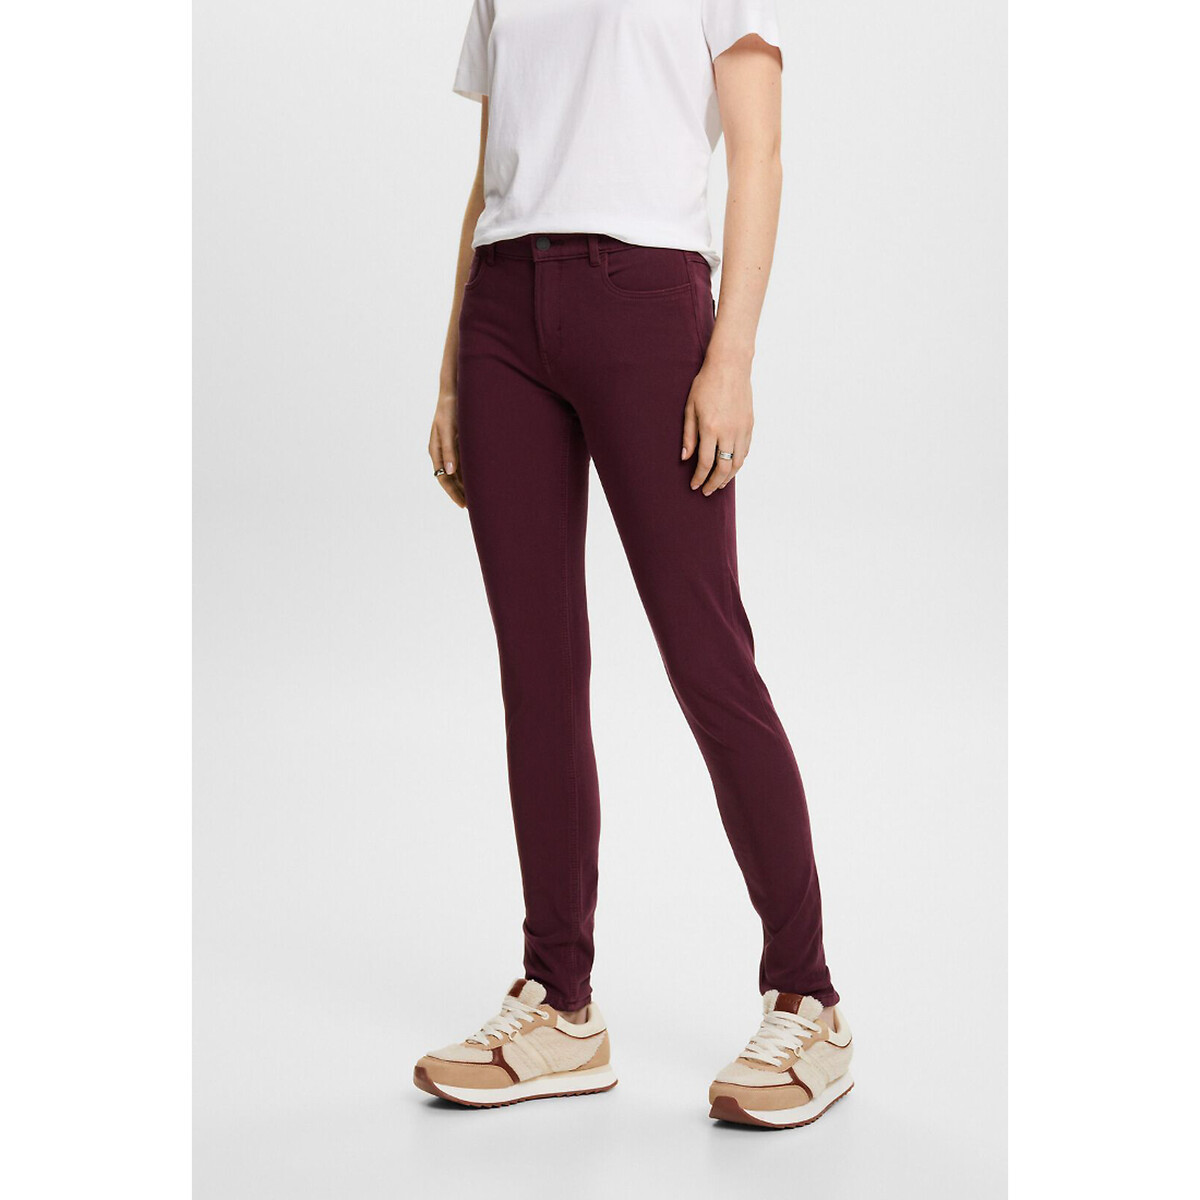 Image of Cotton Mix Skinny Trousers, Length 30"